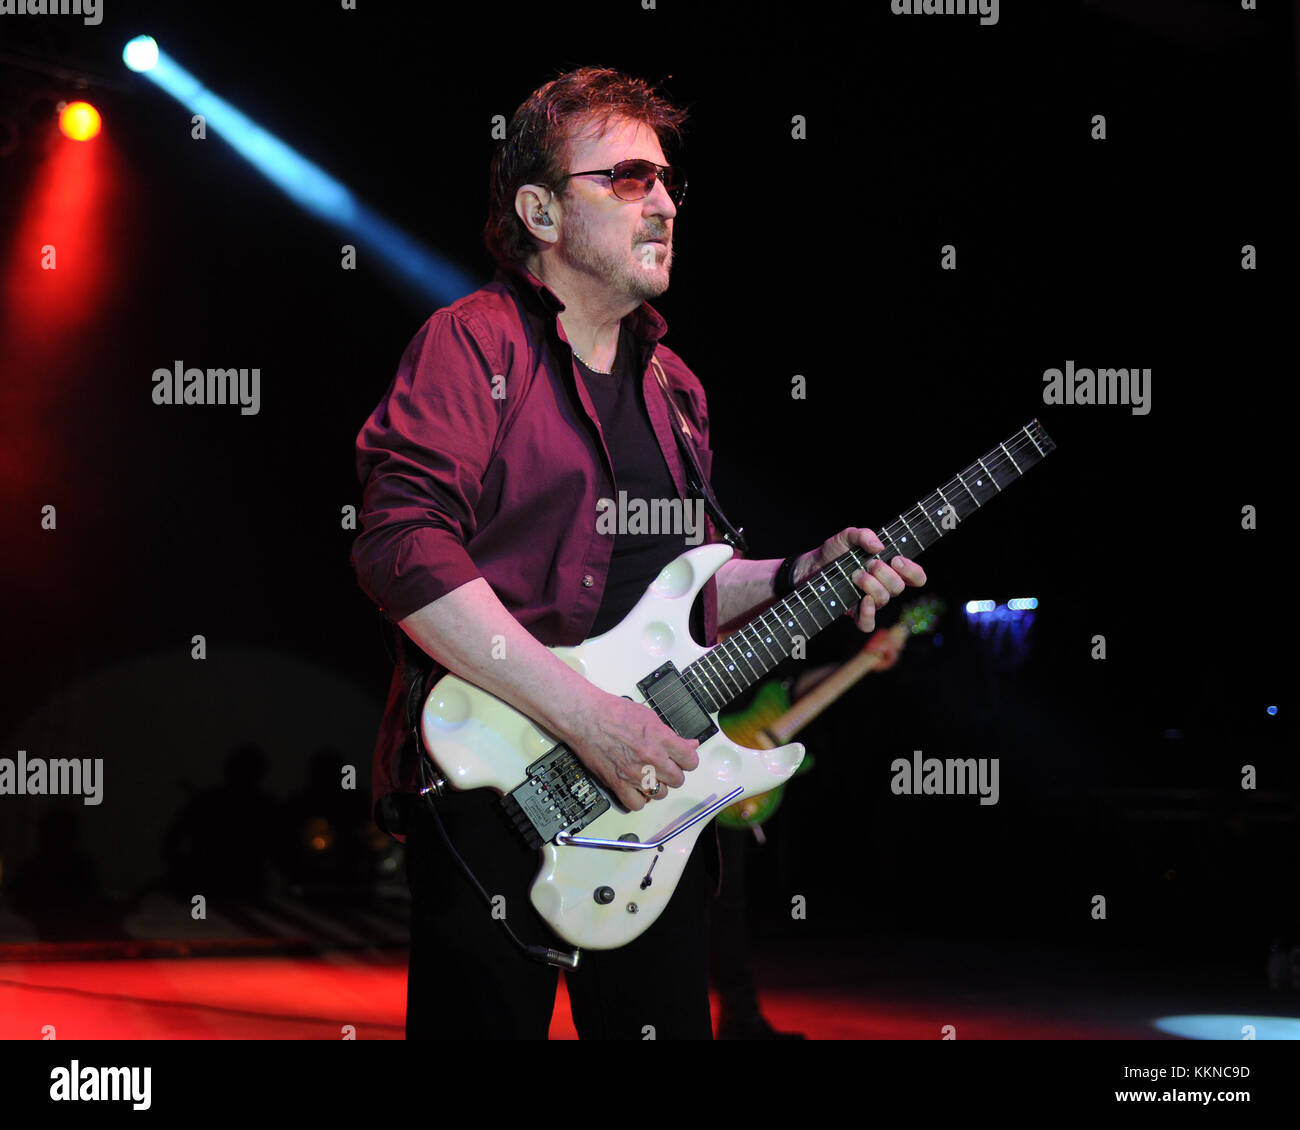 POMPANO BEACH, FL - AUGUST 15: Eric Bloom, Jules Radino and Donald "Buck Dharma" Roeser of Blue Oyster Cult perform at the Pompano Beach Ampitheatre on August 15, 2015 in Pompano Beach Florida.   People:  Donald Roeser, Buck Dharma Stock Photo